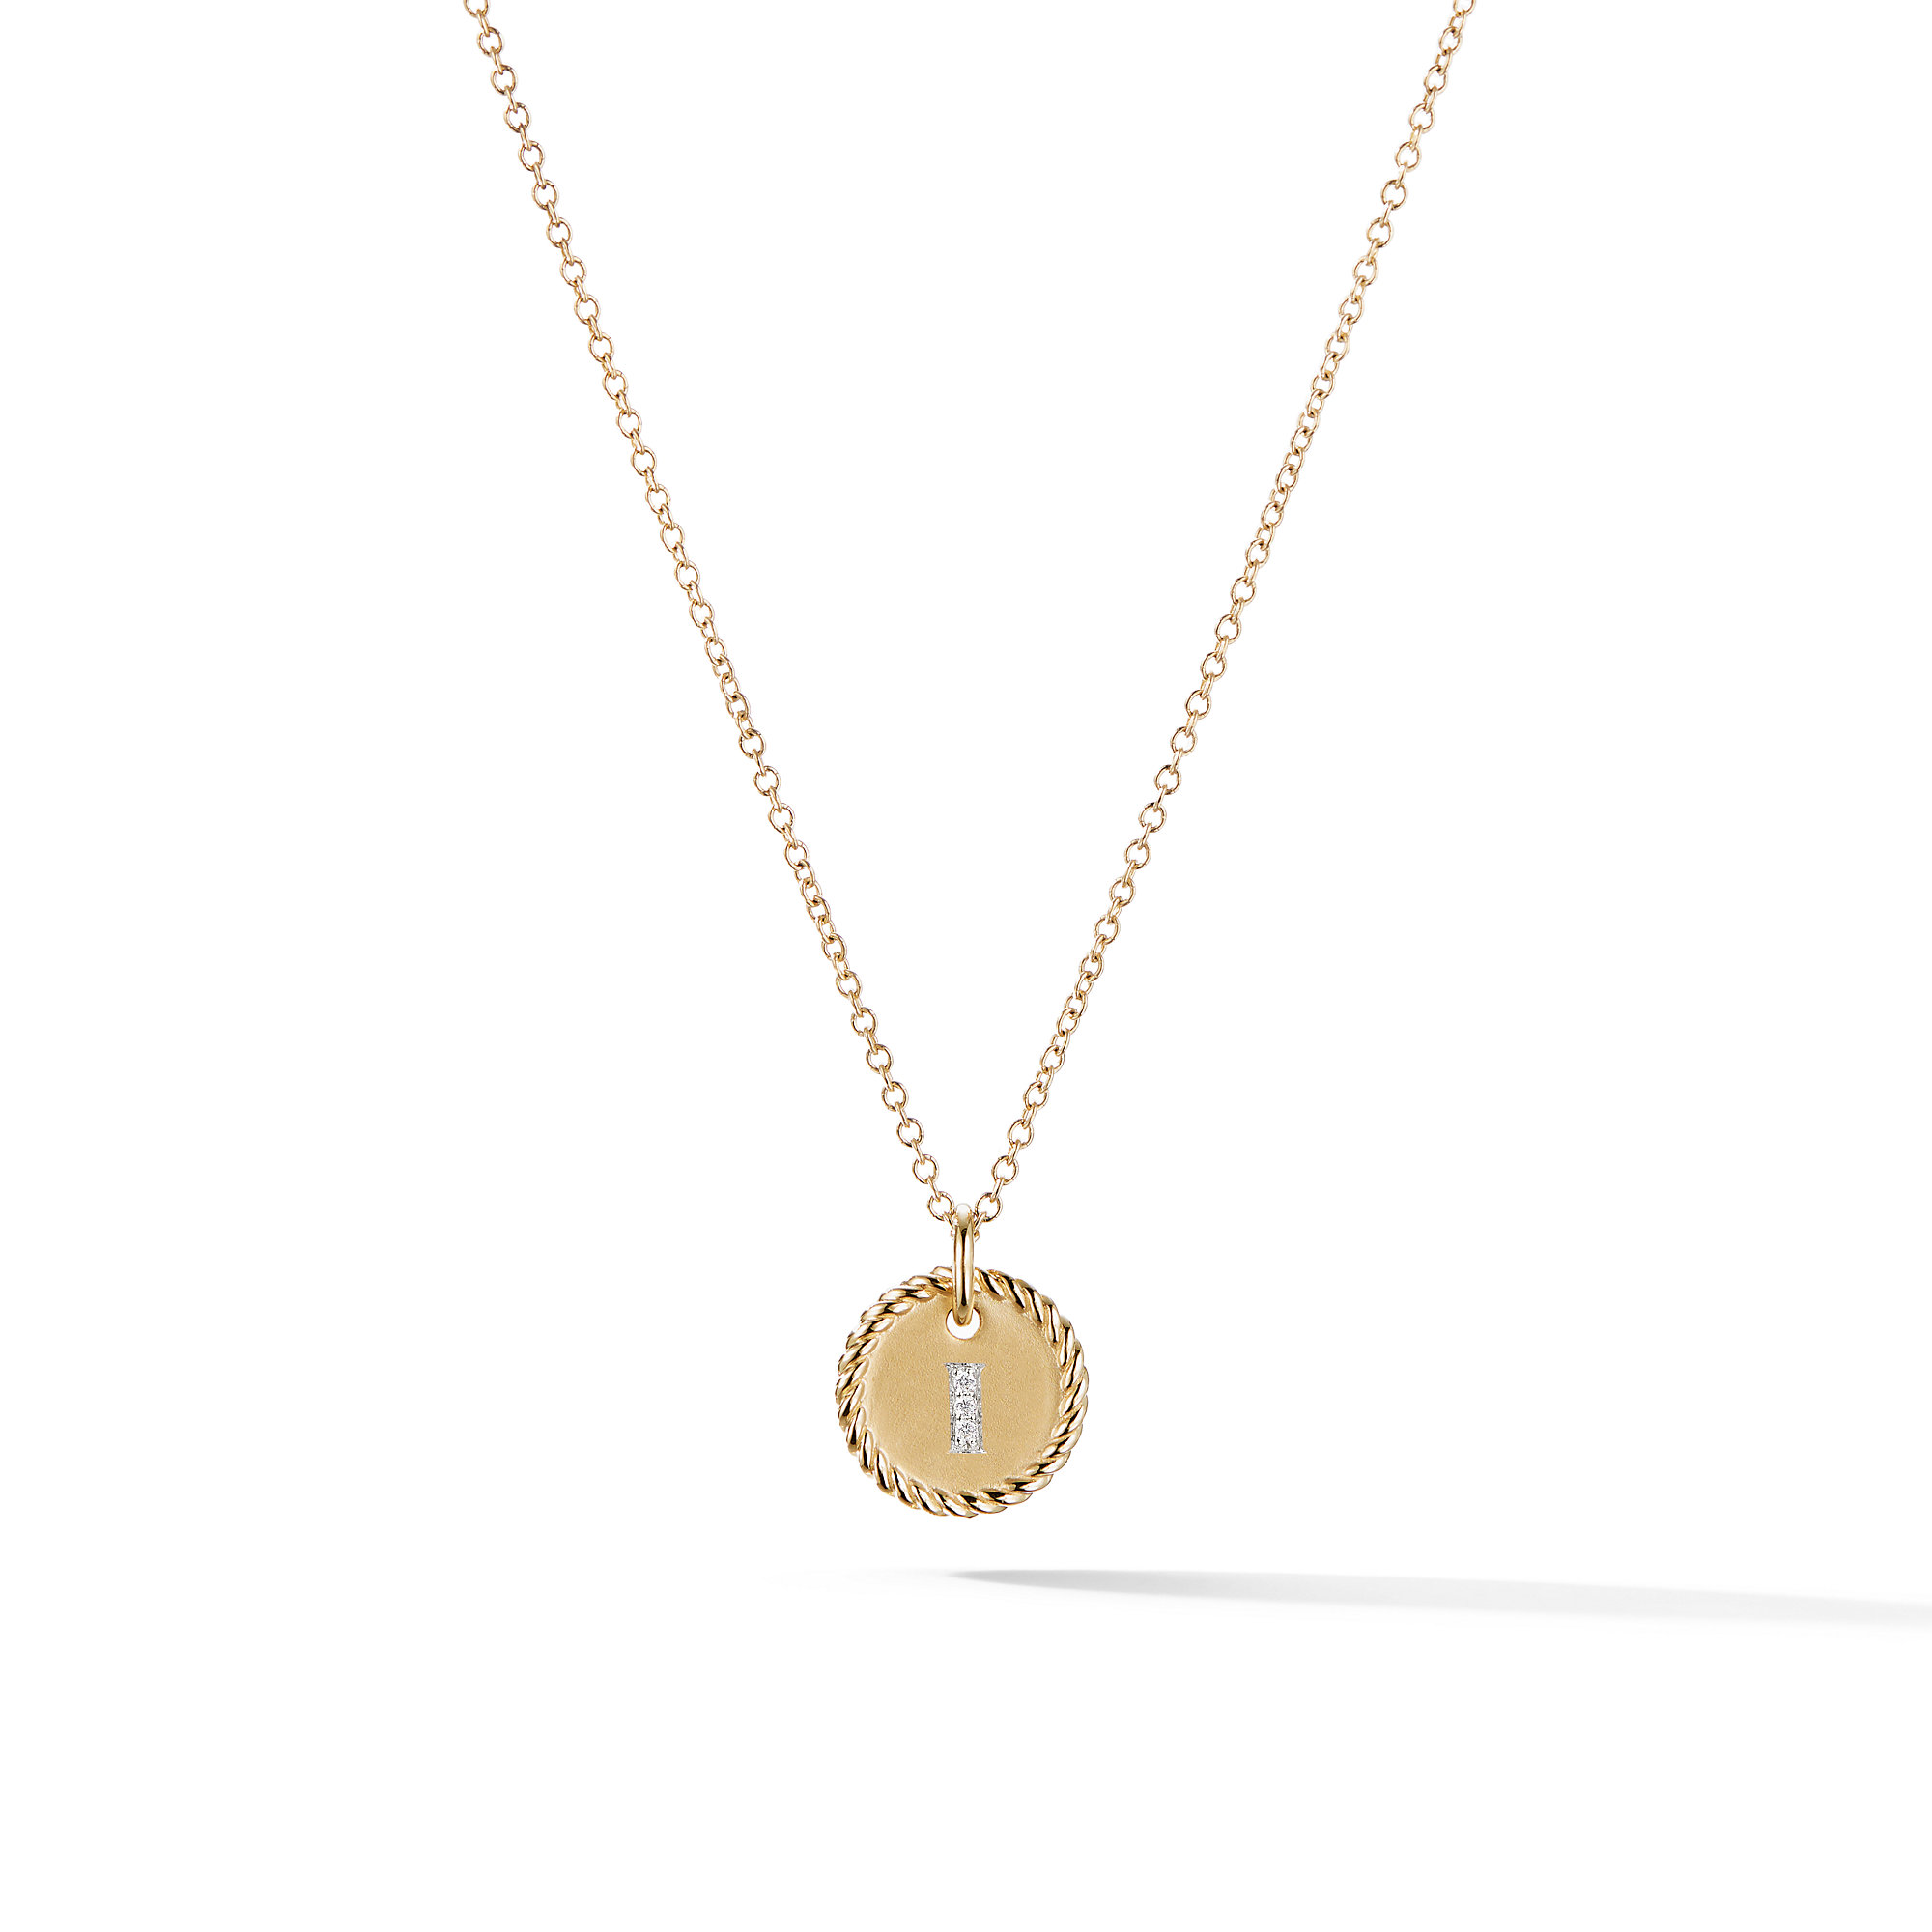 I Pendant with Diamonds in Gold on Chain